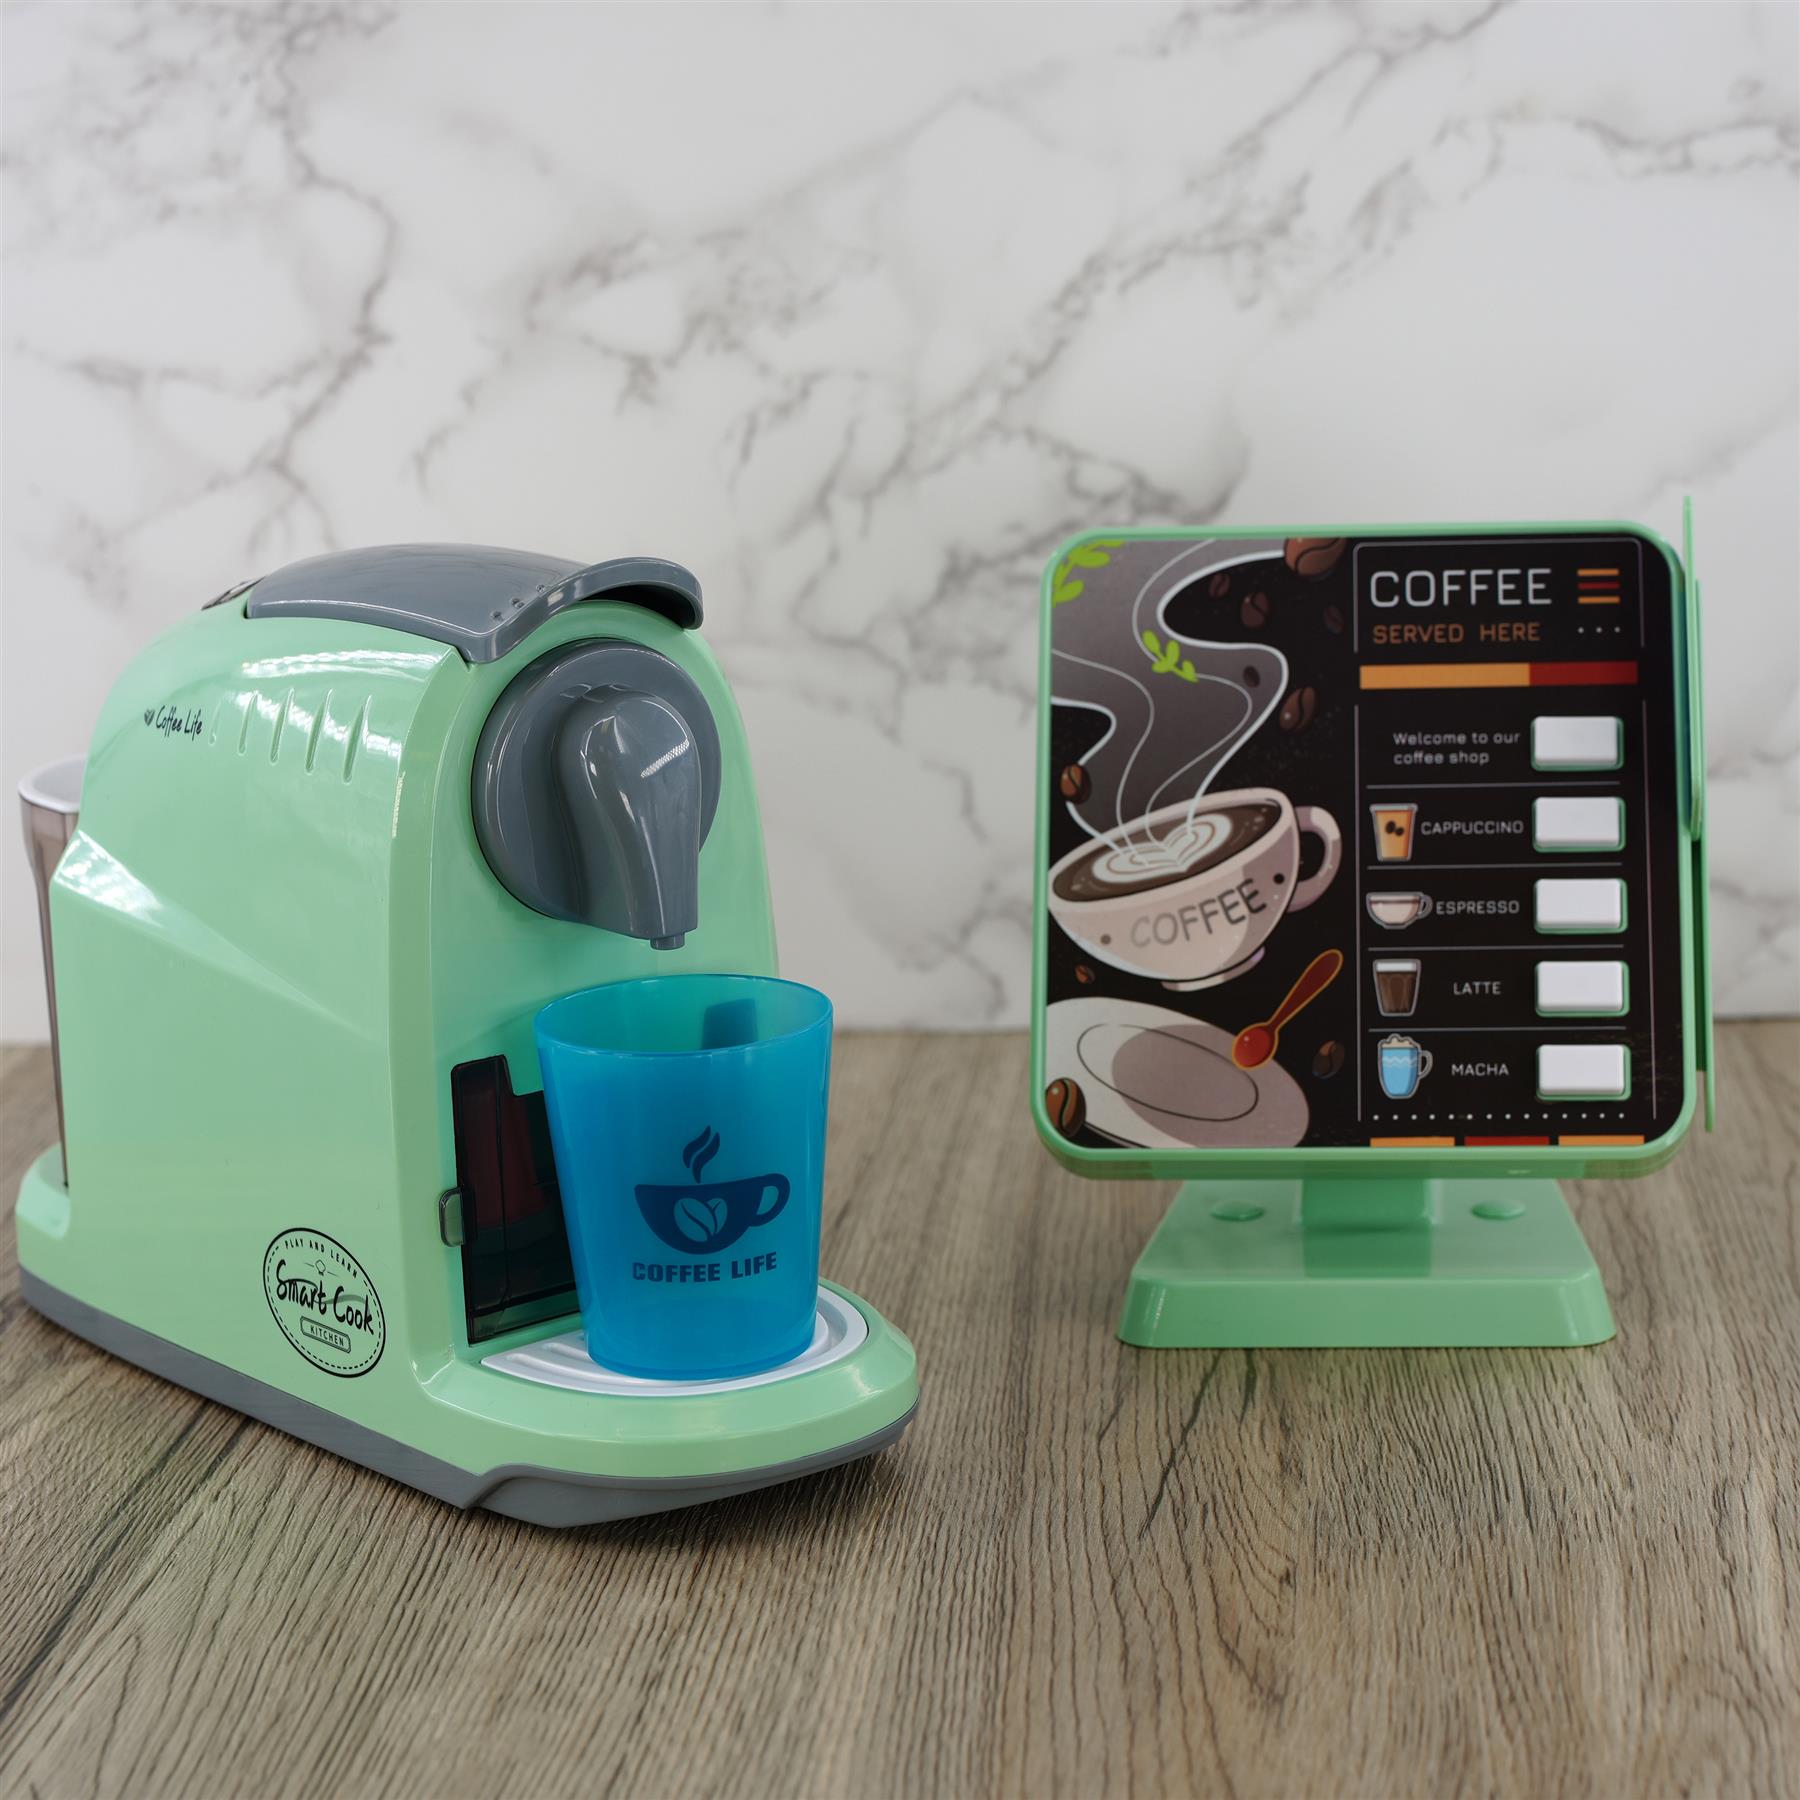 Kids Coffee Maker Machine Toy Kitchen Role Play Set with Cash Register Play Food by The Magic Toy Shop - The Magic Toy Shop